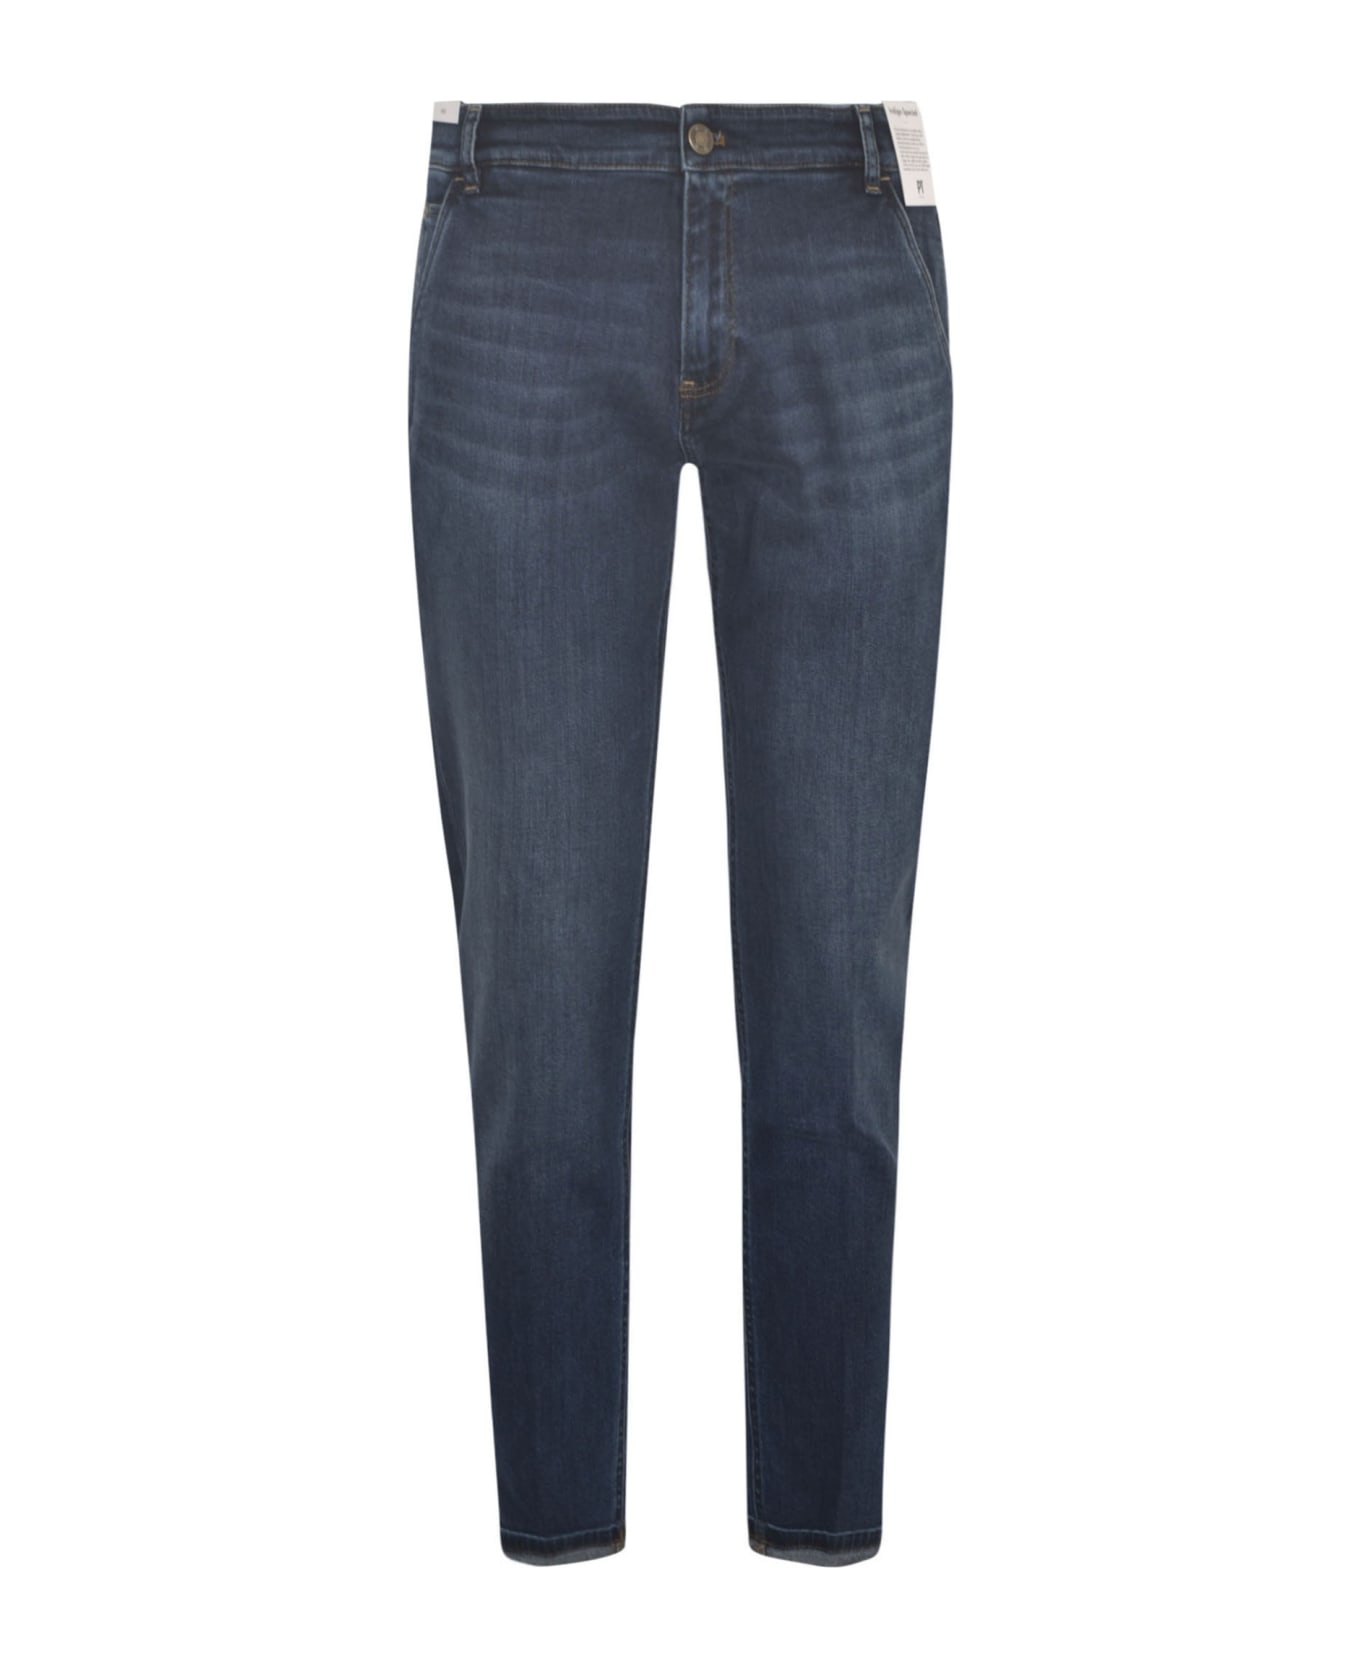 PT Torino Fitted Buttoned Jeans